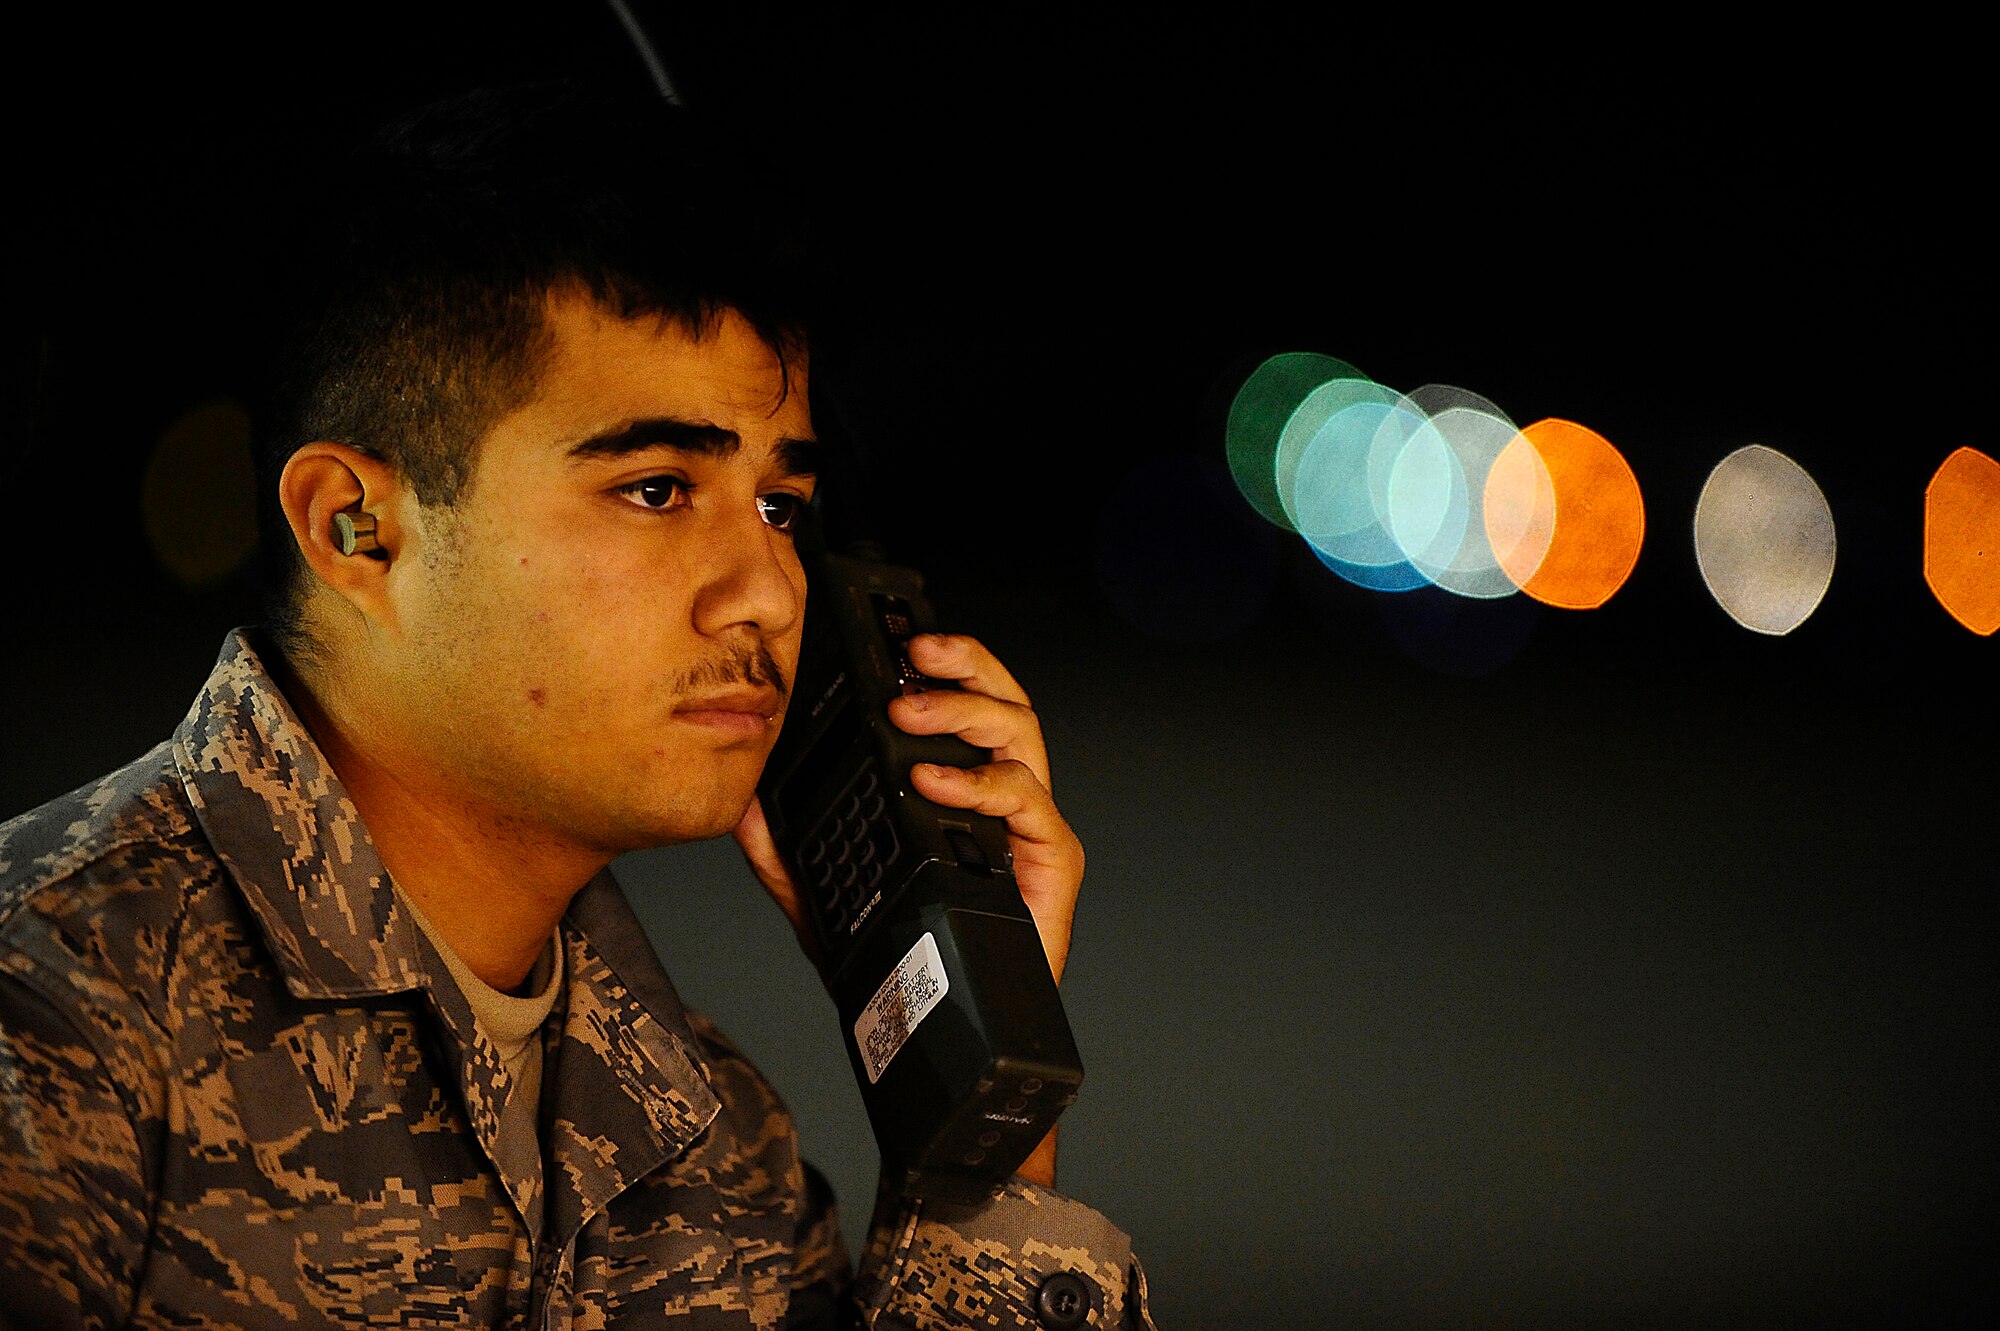 Airman 1st Class Hugo Garnica communicates with an MQ-9 Reaper pilot using a land mobile radio at Joint Base Balad, Iraq, Nov. 18. He was performing a pre-flight check to ensure the unmanned aircraft vehicle was operational. Garnica, an assistant dedicated crew chief assigned to the 332nd Expeditionary Aircraft Maintenance Squadron, is deployed from Creech Air Force Base, Nev. His hometown is Oceanside, Calif. (U.S. Air Force photo/Airman 1st Class Jason Epley)